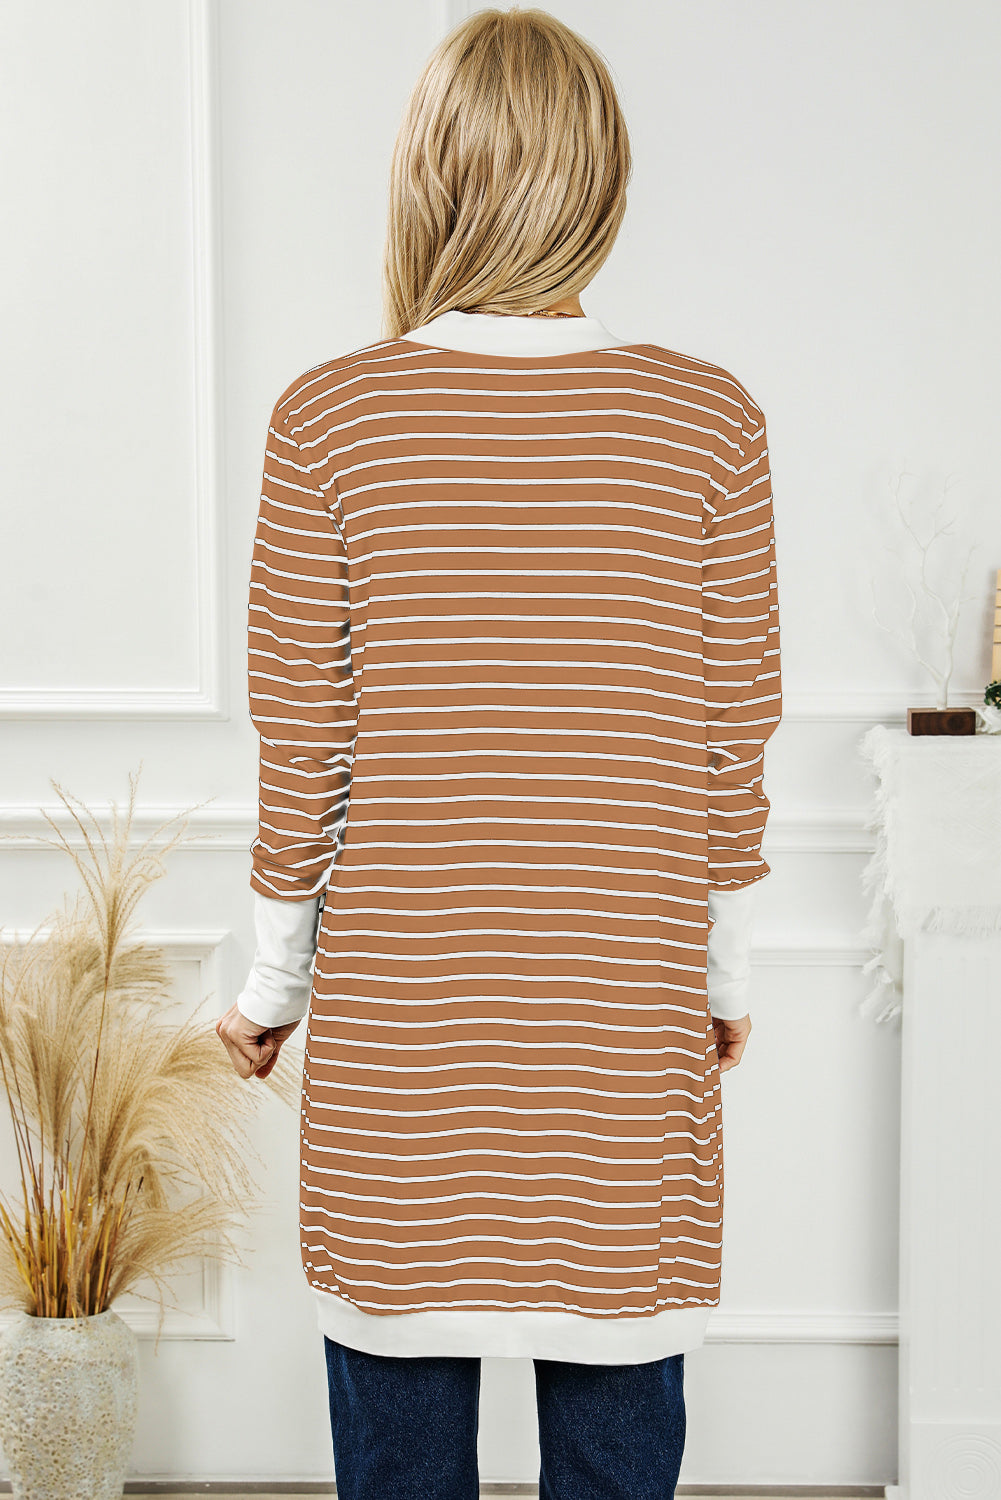 Striped Open Front Longline Cardigan - Women’s Clothing & Accessories - Shirts & Tops - 6 - 2024